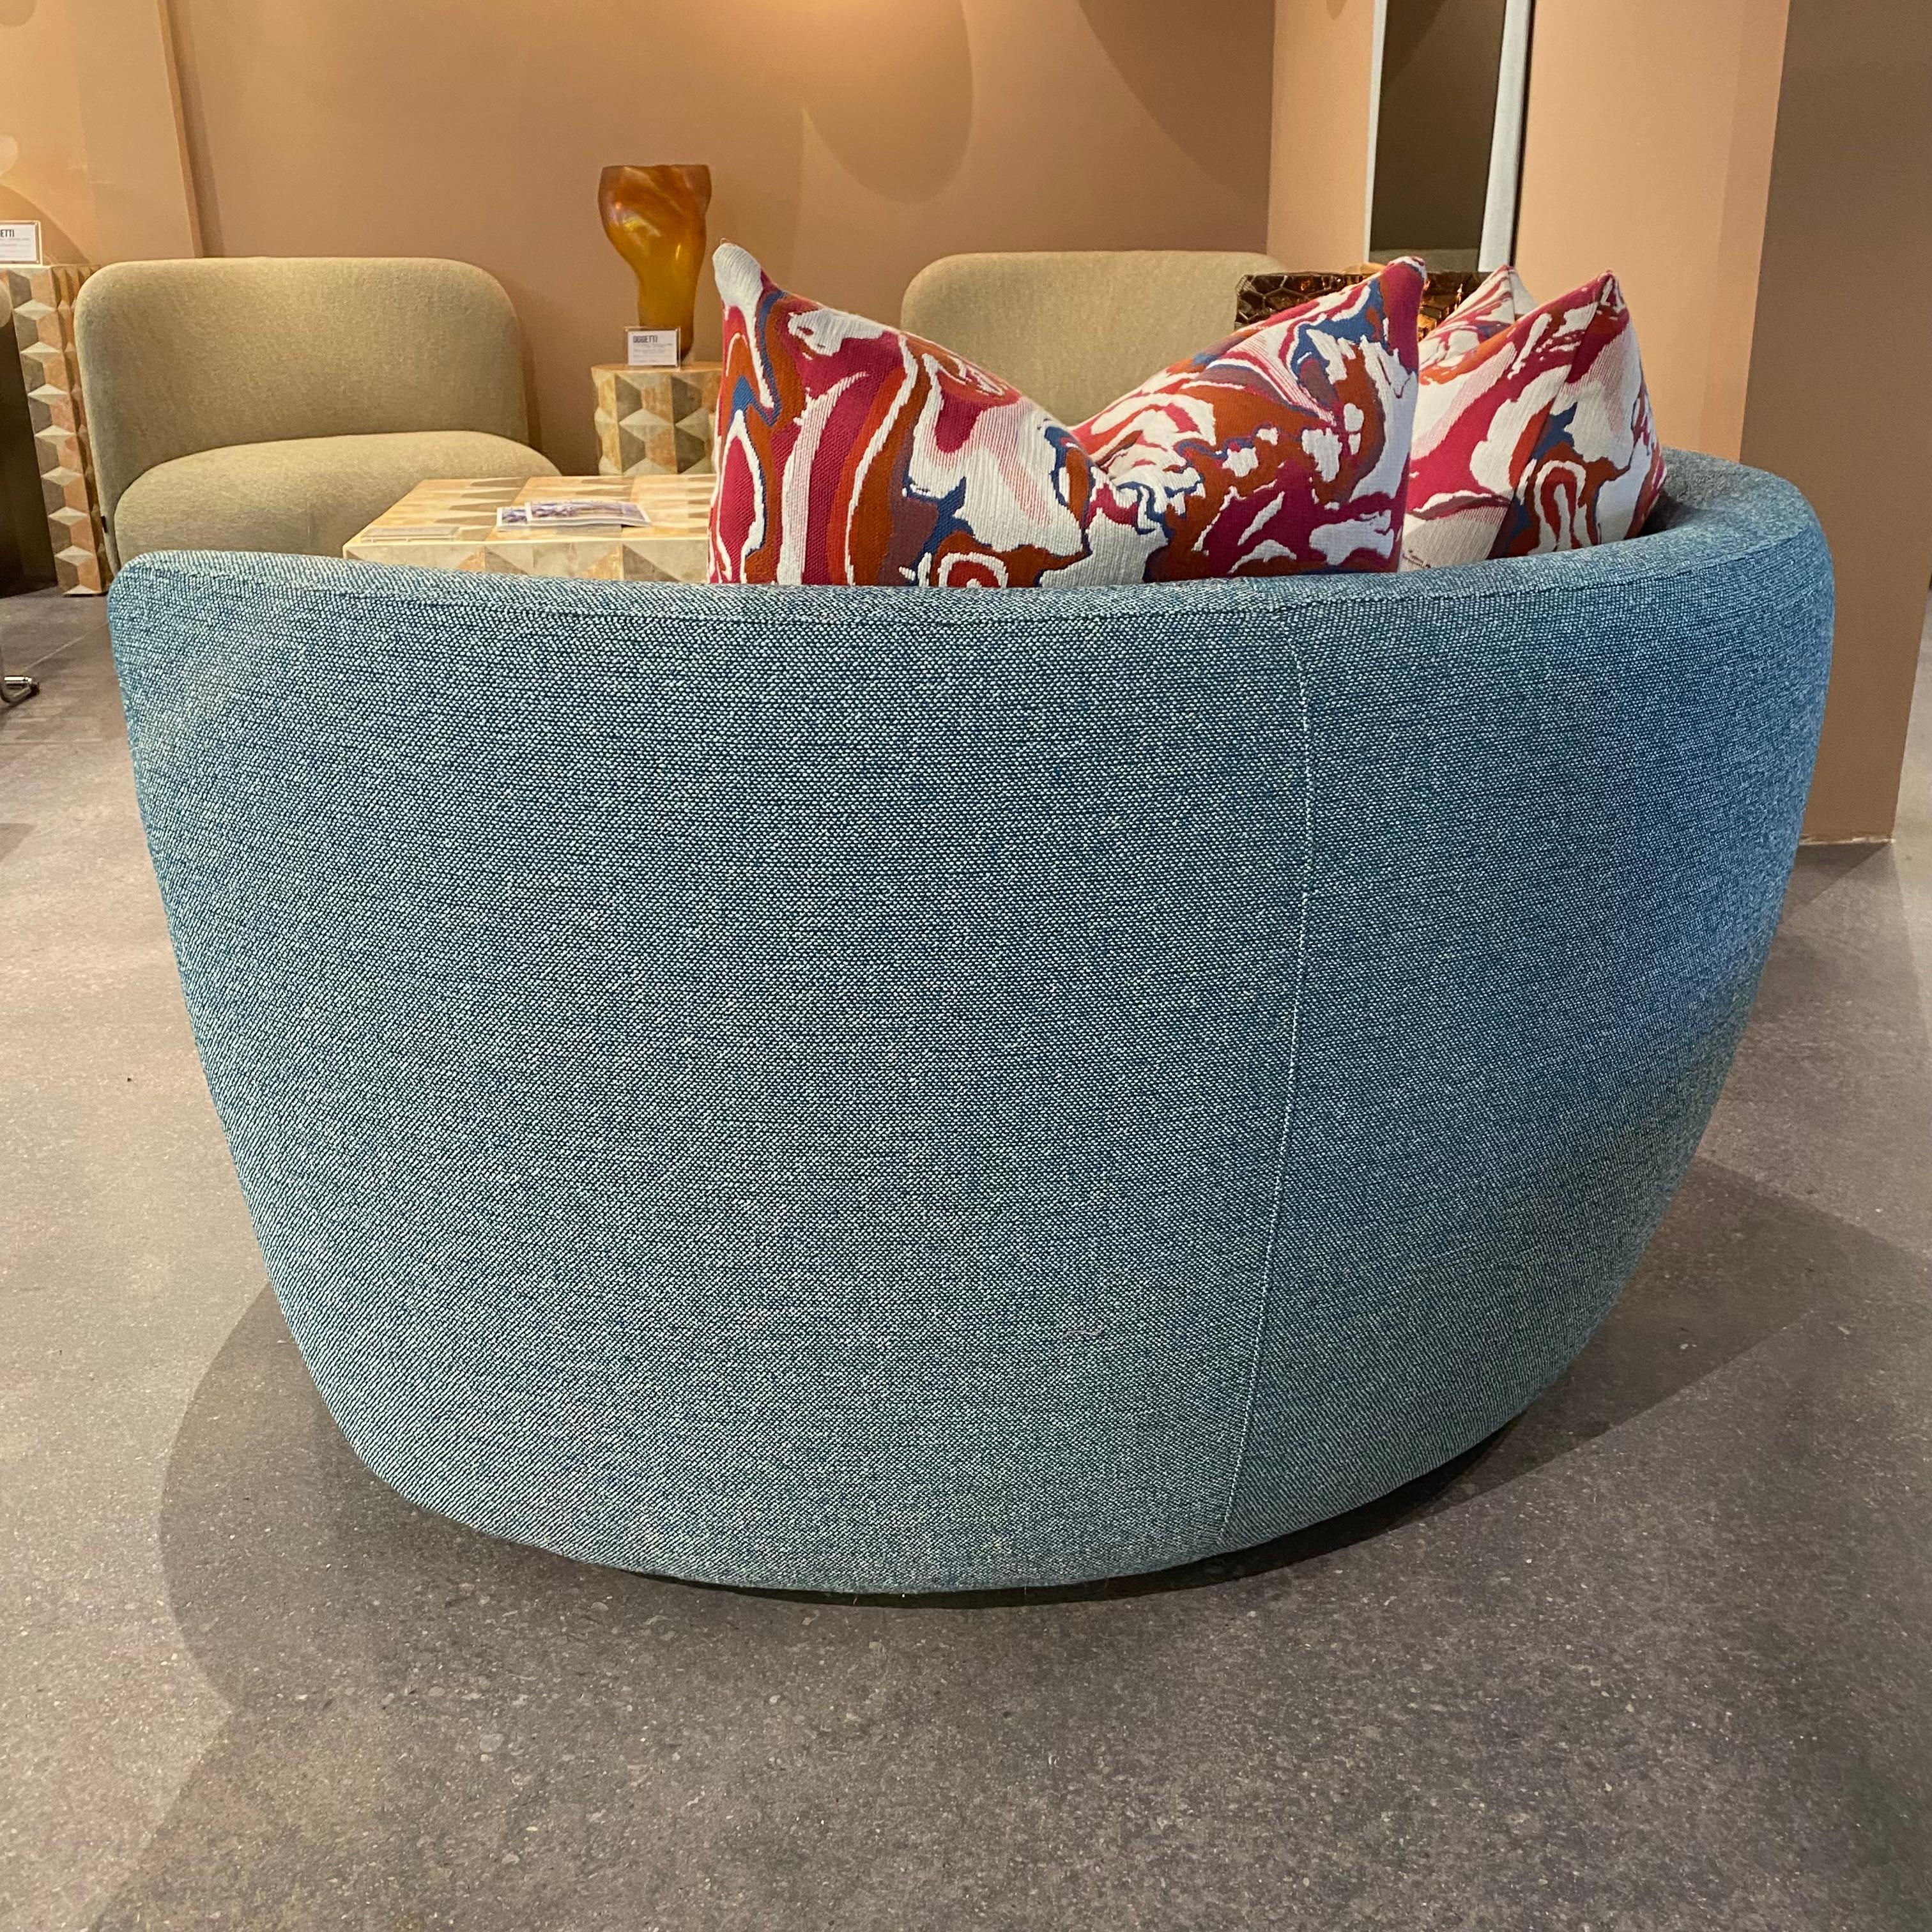 Round Lounge Chair in Aqua In Excellent Condition For Sale In Hollywood, FL